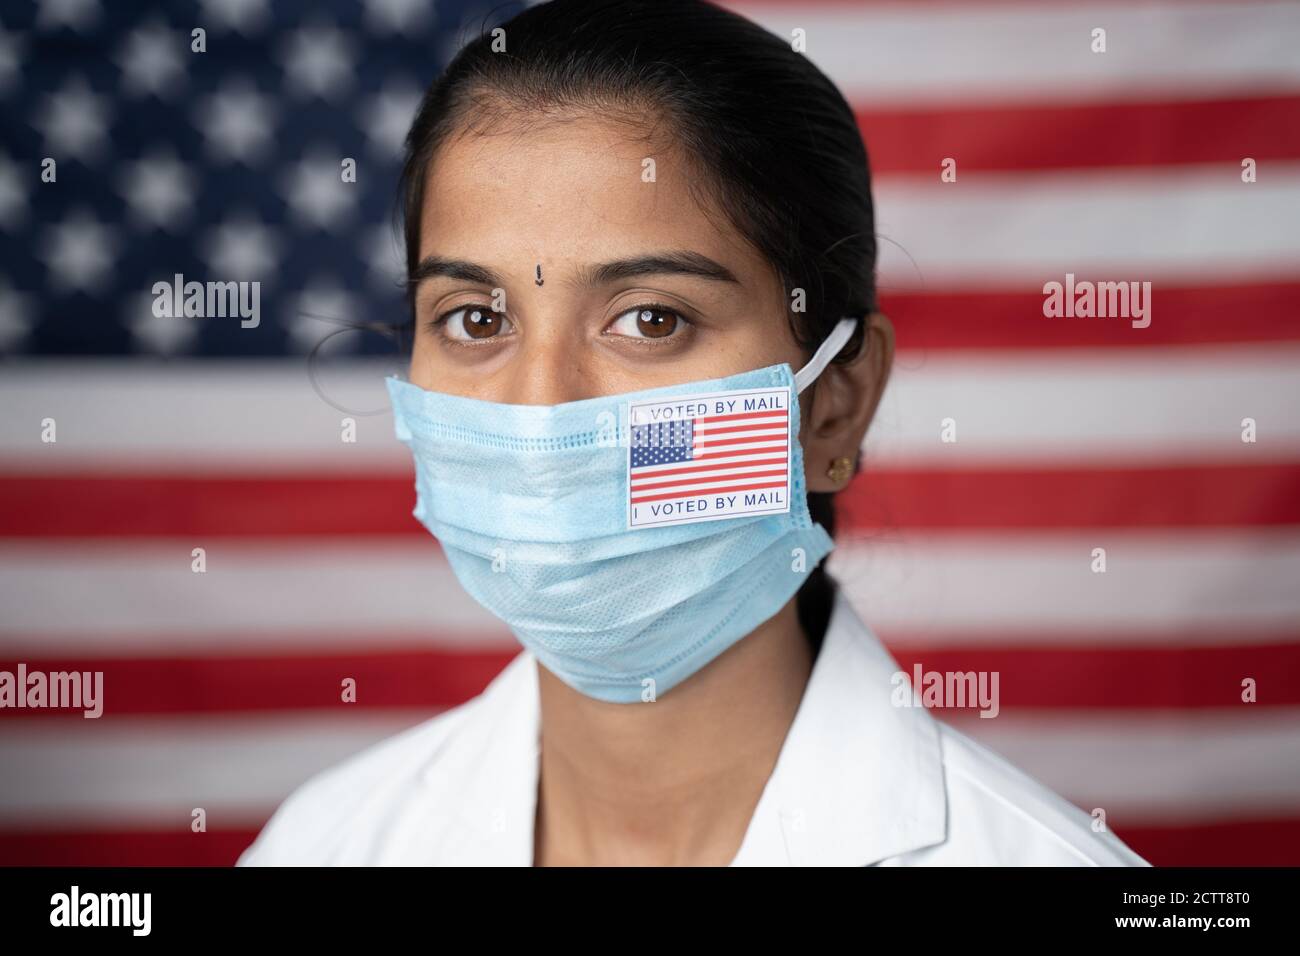 Close up face of Girl with I voted by main sticker on her medical mask with US flag as background - Concept of mail in voting in US election. Stock Photo